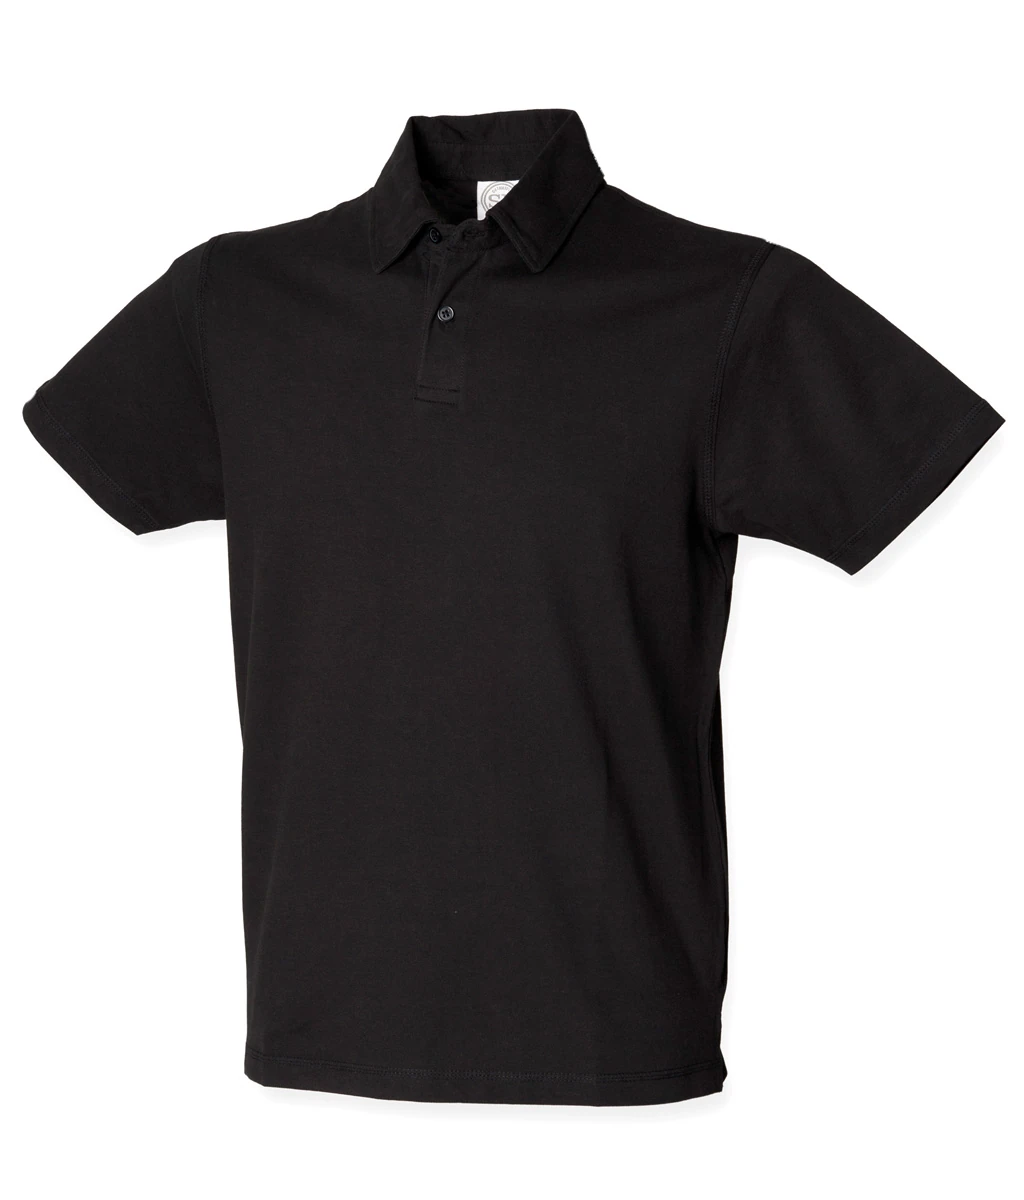 SkinniFit Short Sleeved Stretch Polo